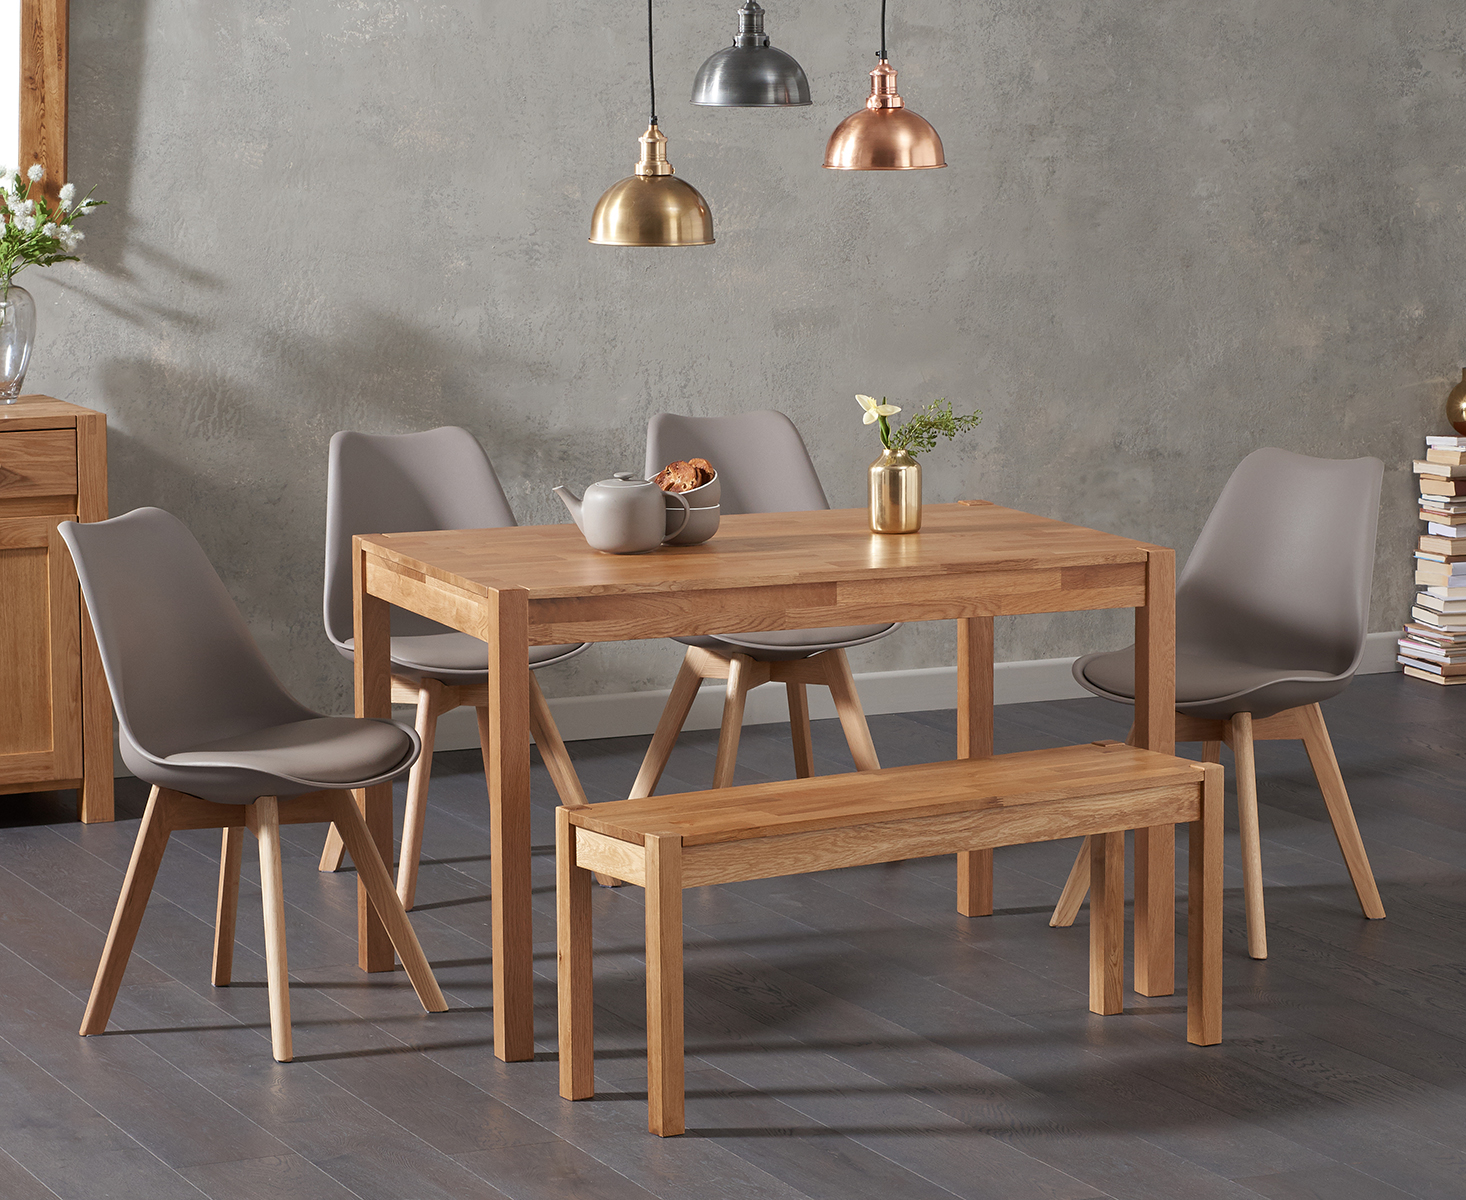 York 120cm Solid Oak Dining Table With 2 Mink Orson Faux Leather Chairs And 1 York Bench